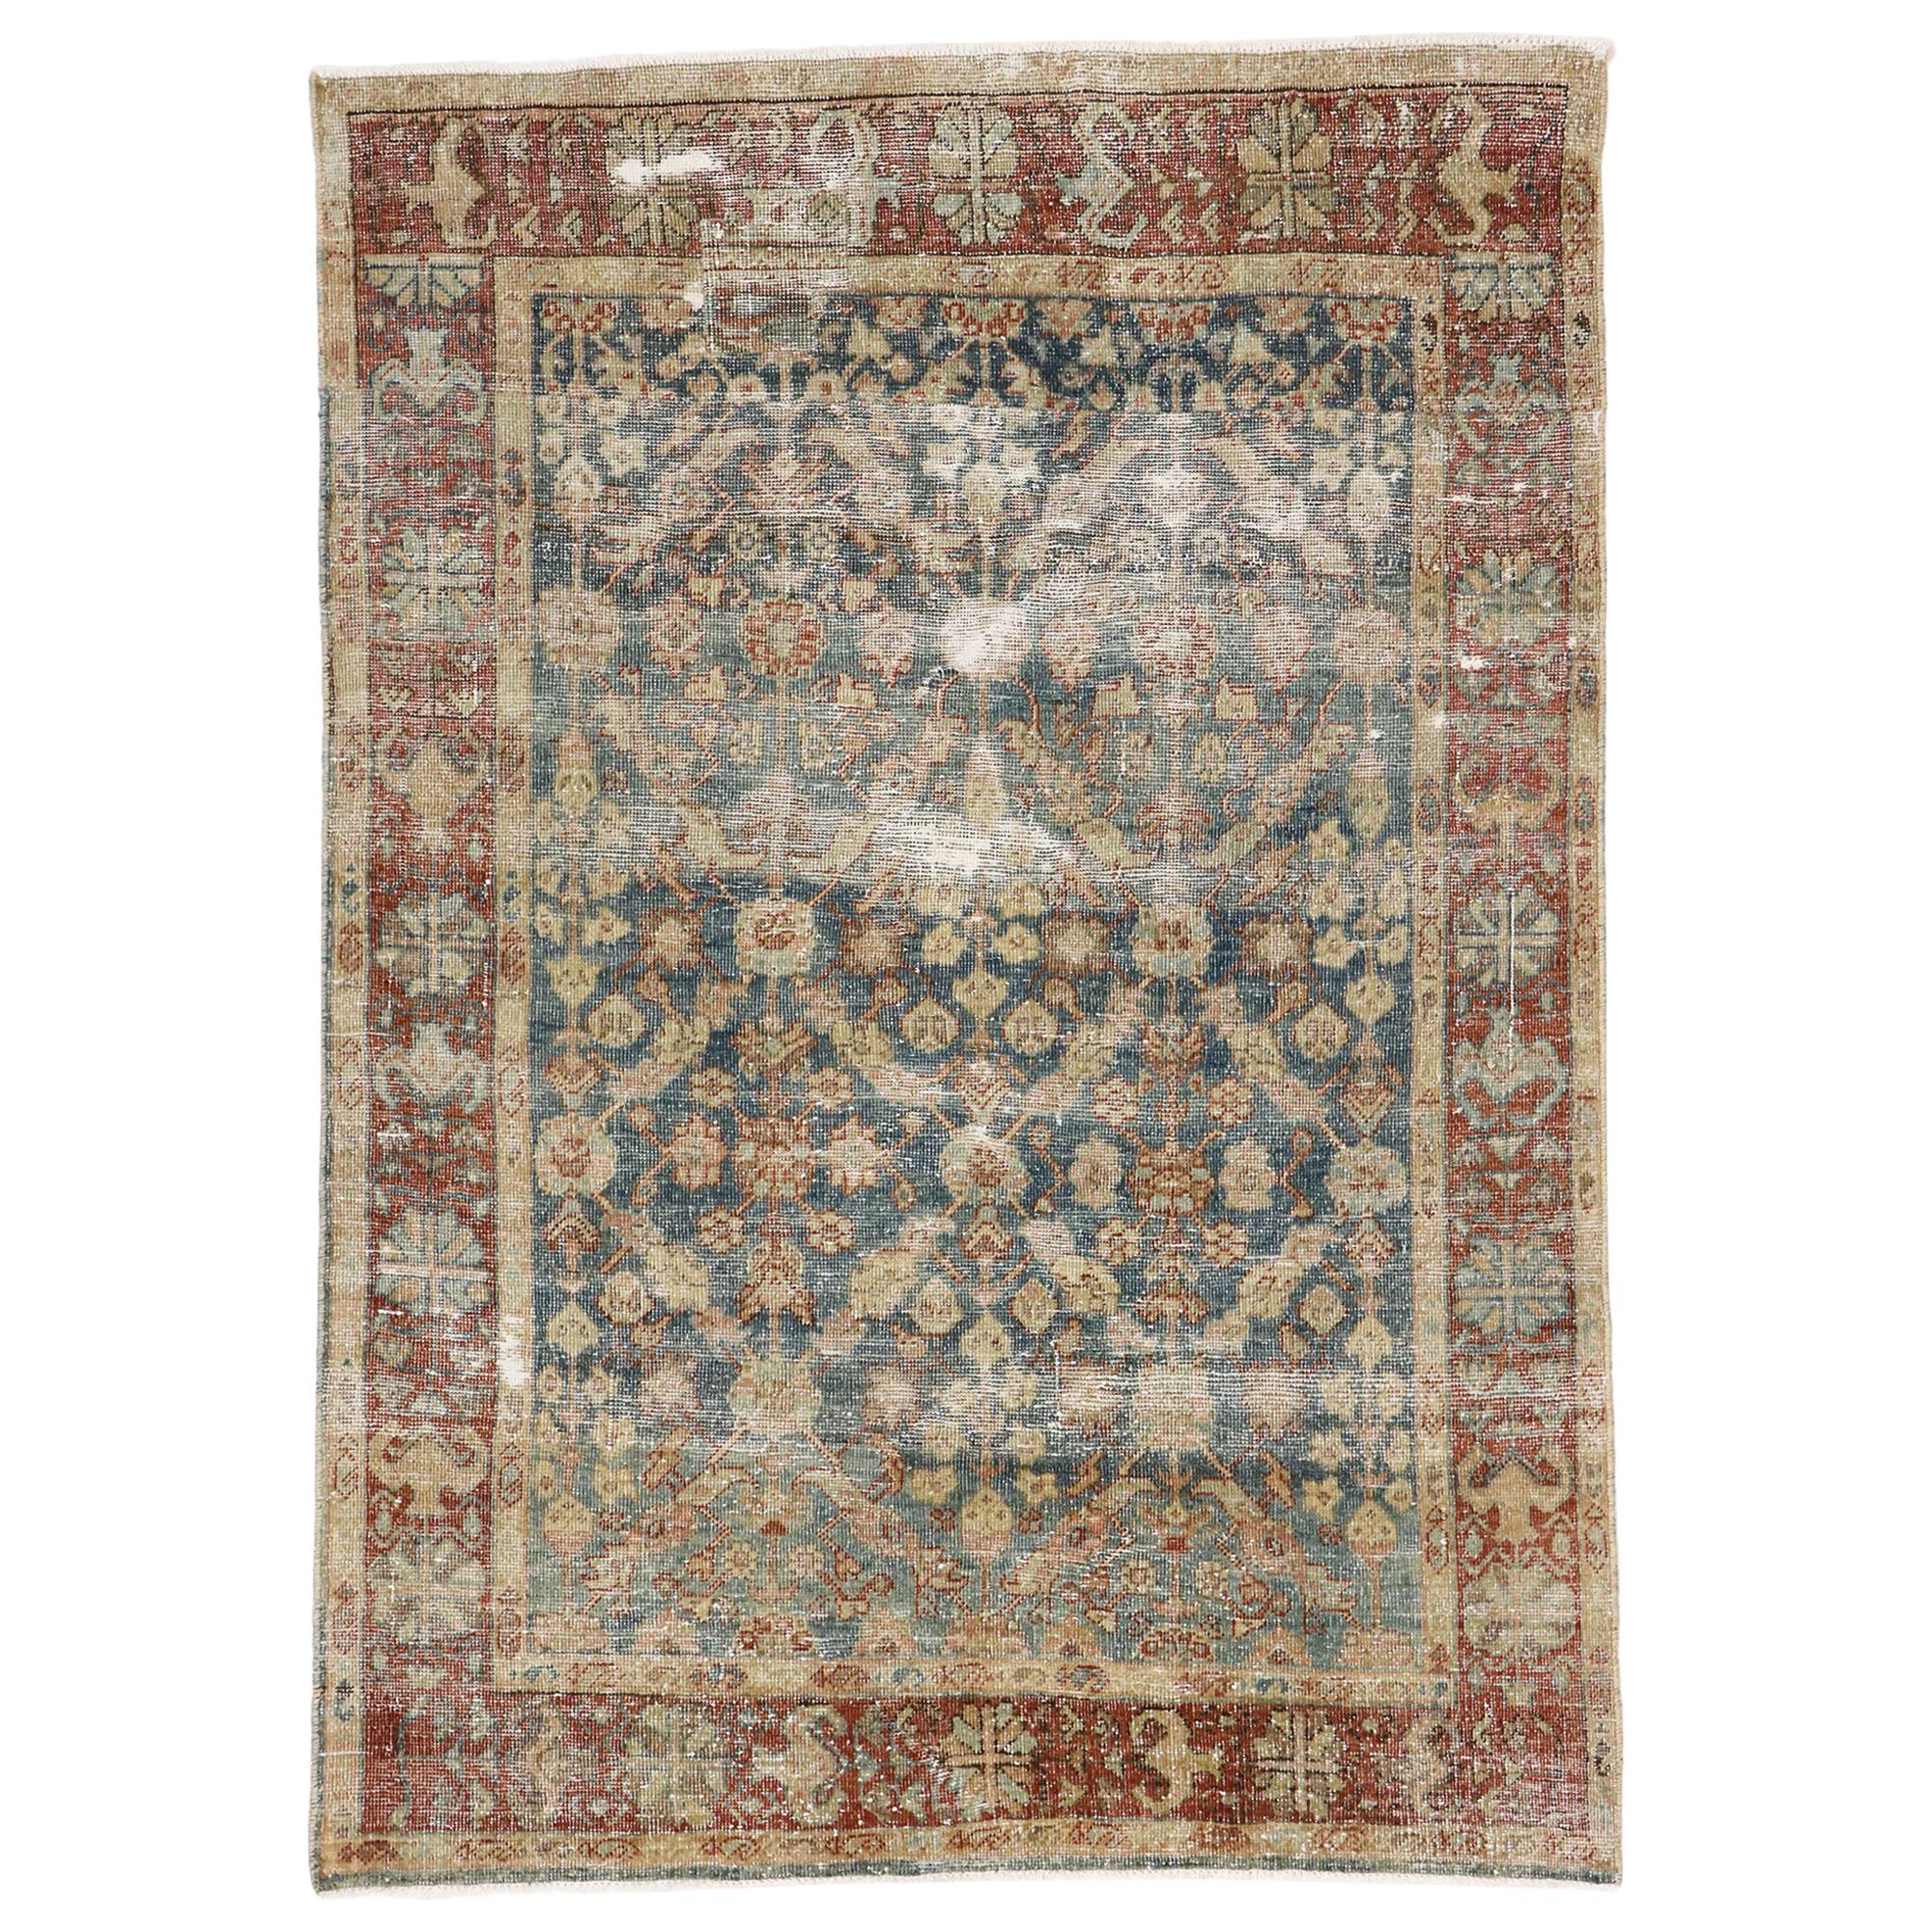 Distressed Antique Persian Mahal Rug with Rustic English Style